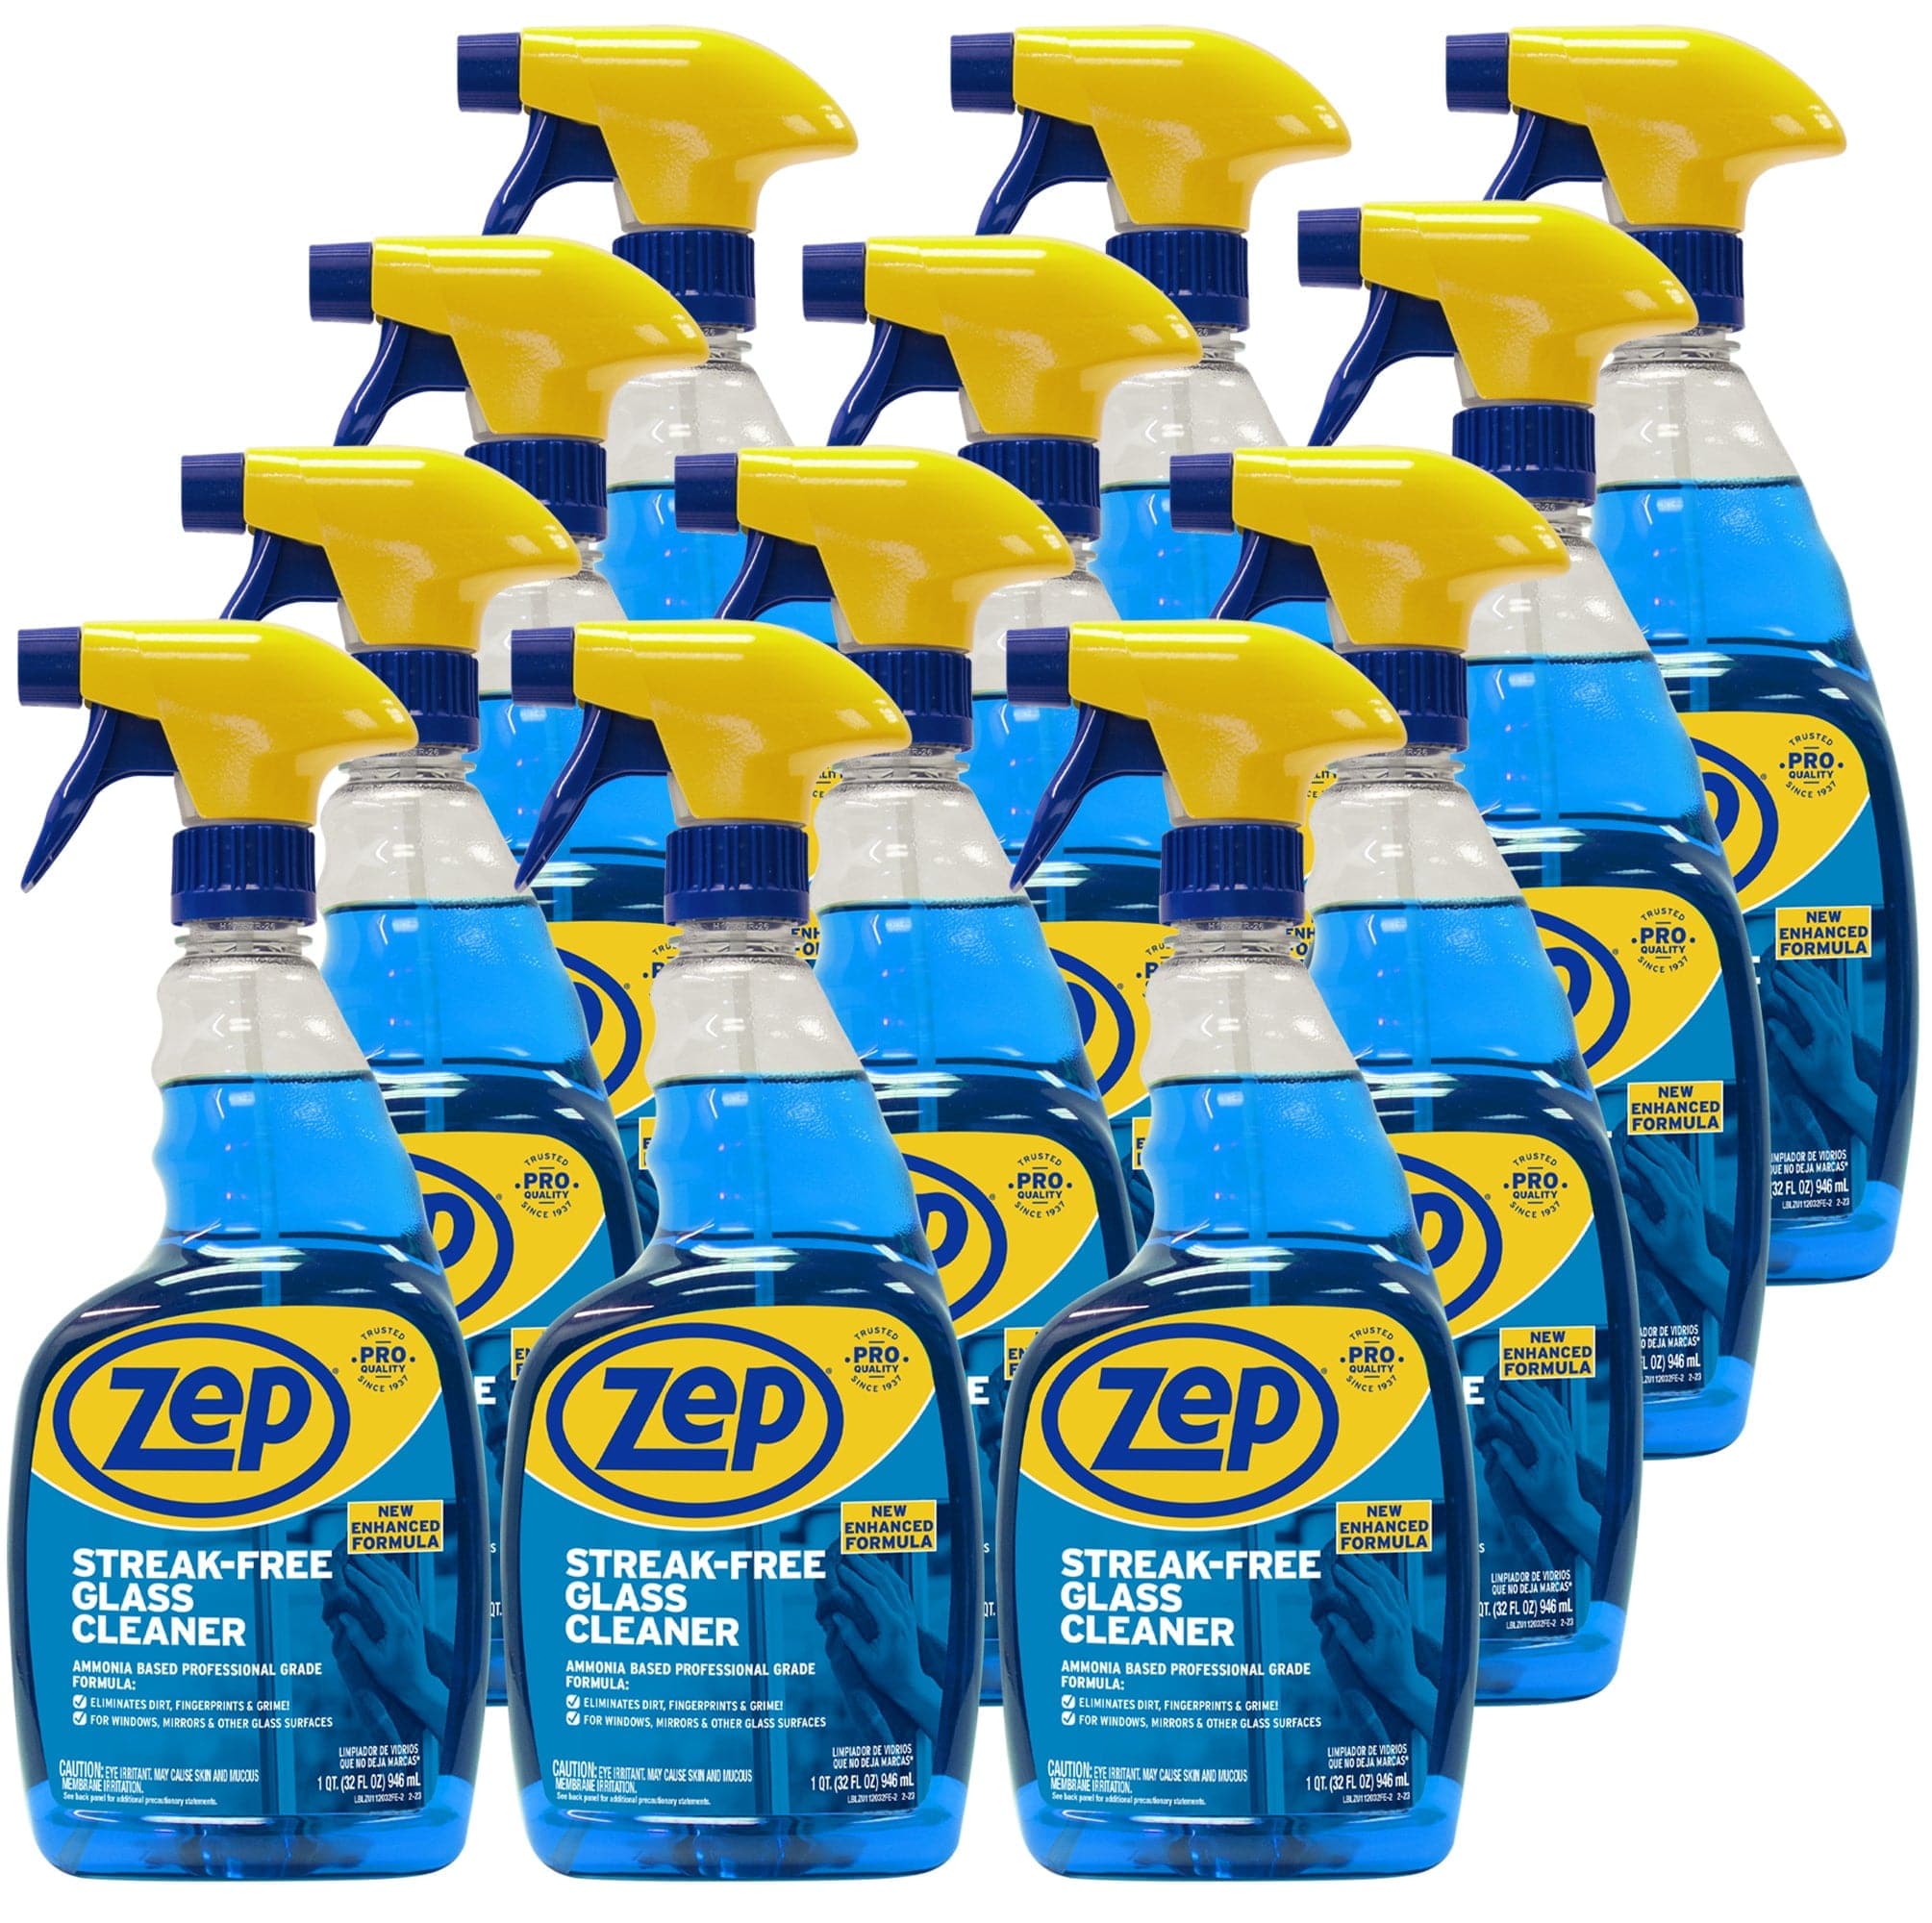 Zep Plus Glass & Mirror Foaming Cleaner - 32 oz. (Case of 12) - R53812 - Keep Your Mirror and Glass Surfaces Clear + Streak-Free While Also